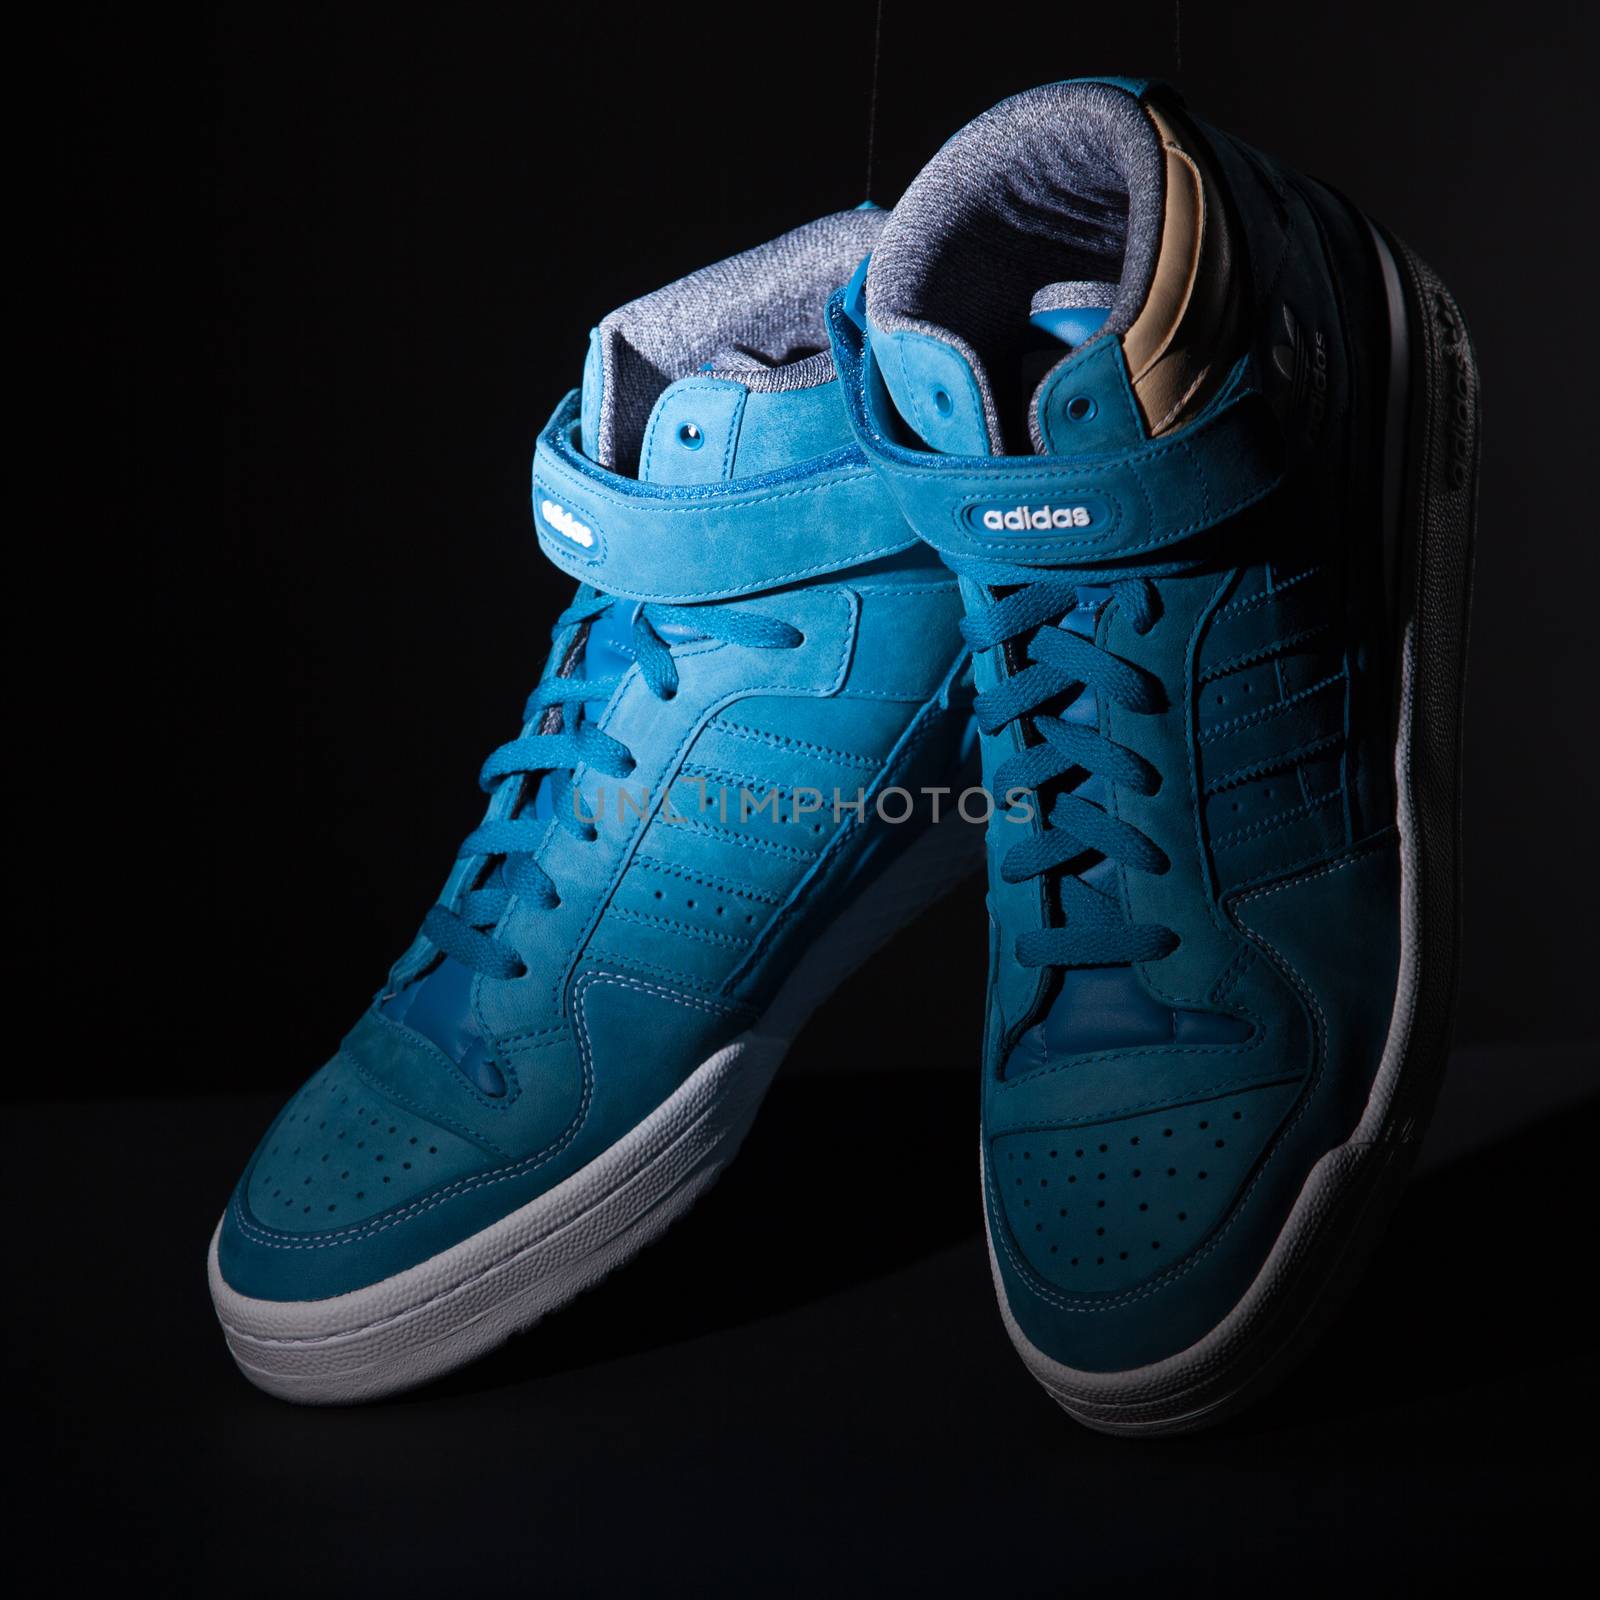 Ukraine, Kiev - FEBRUARY 2, 2015: Adidas origibal. Picture of a pair of blue trainers over a black background